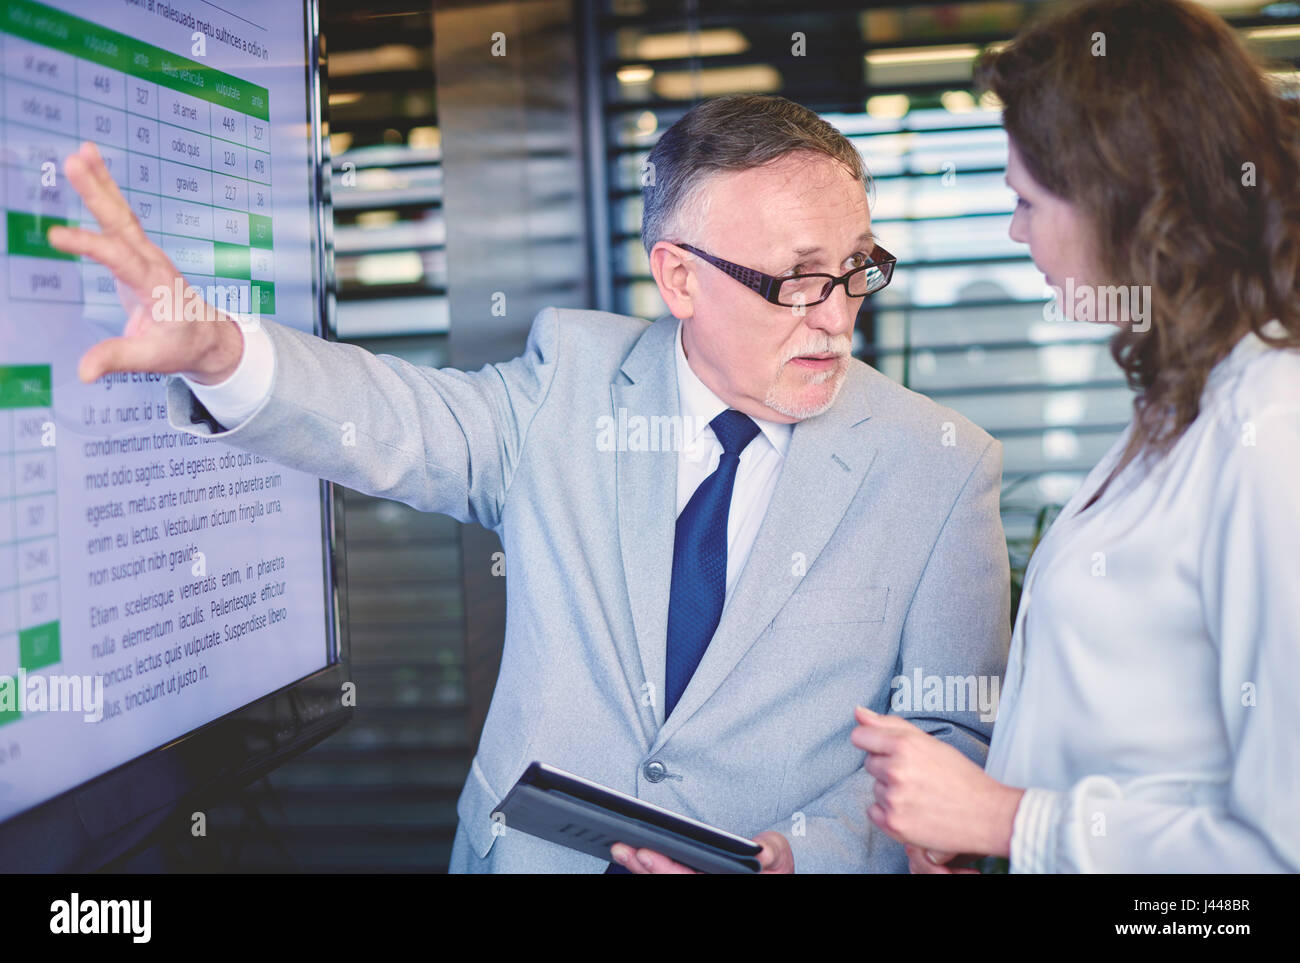 Picture of professional business presentation Stock Photo